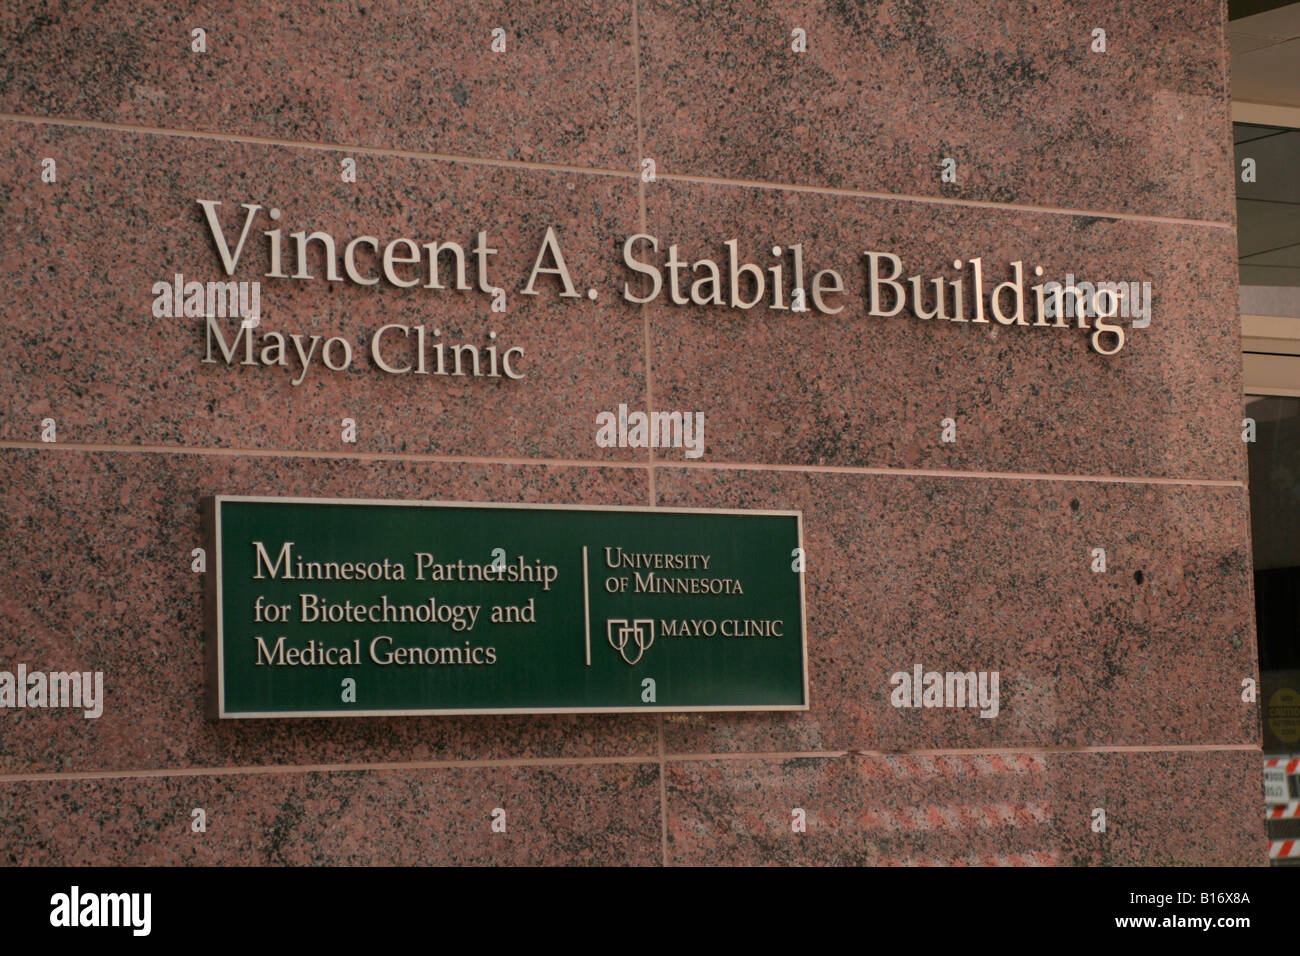 Stabile Building part of Mayo medical complex in Rochester Minnesota Stock Photo